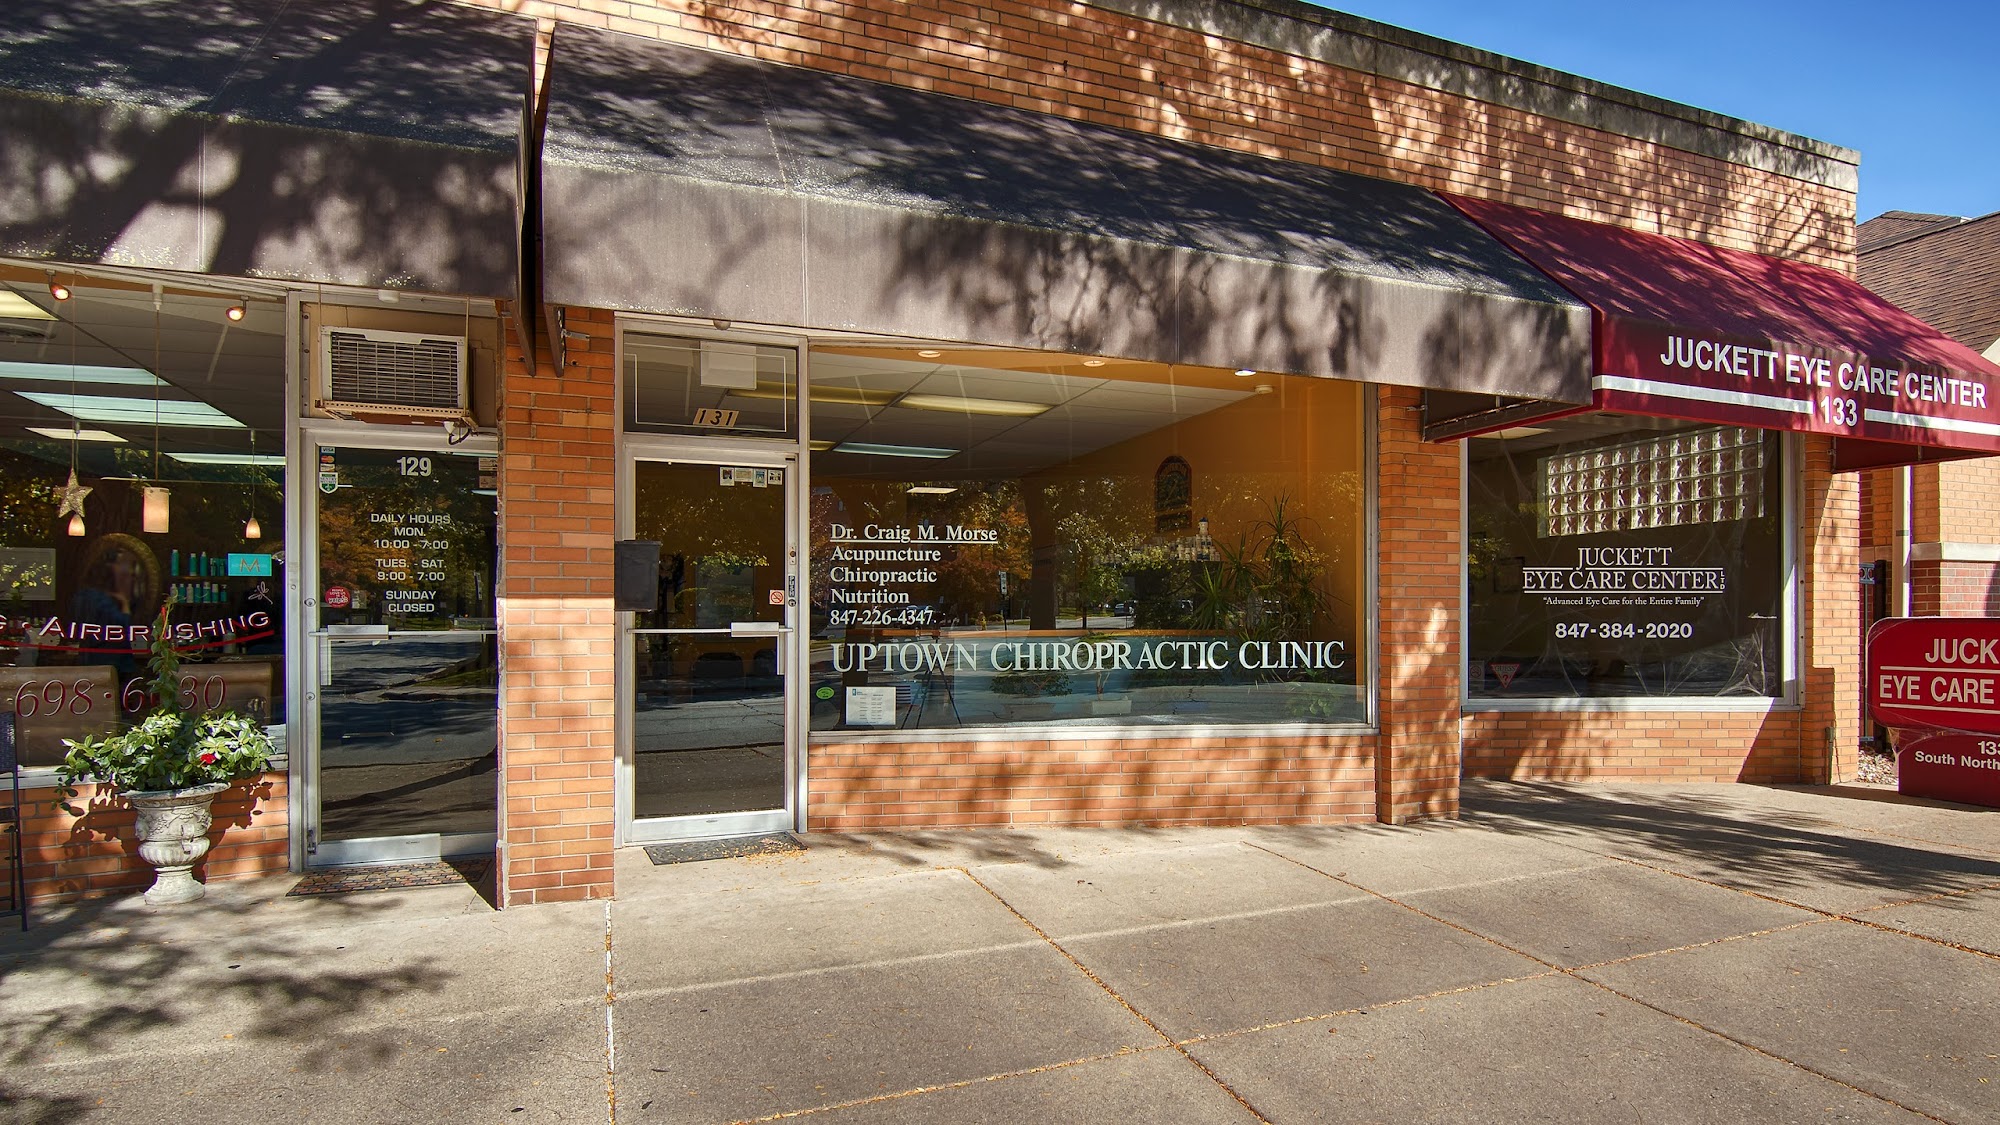 Uptown Chiropractic Clinic